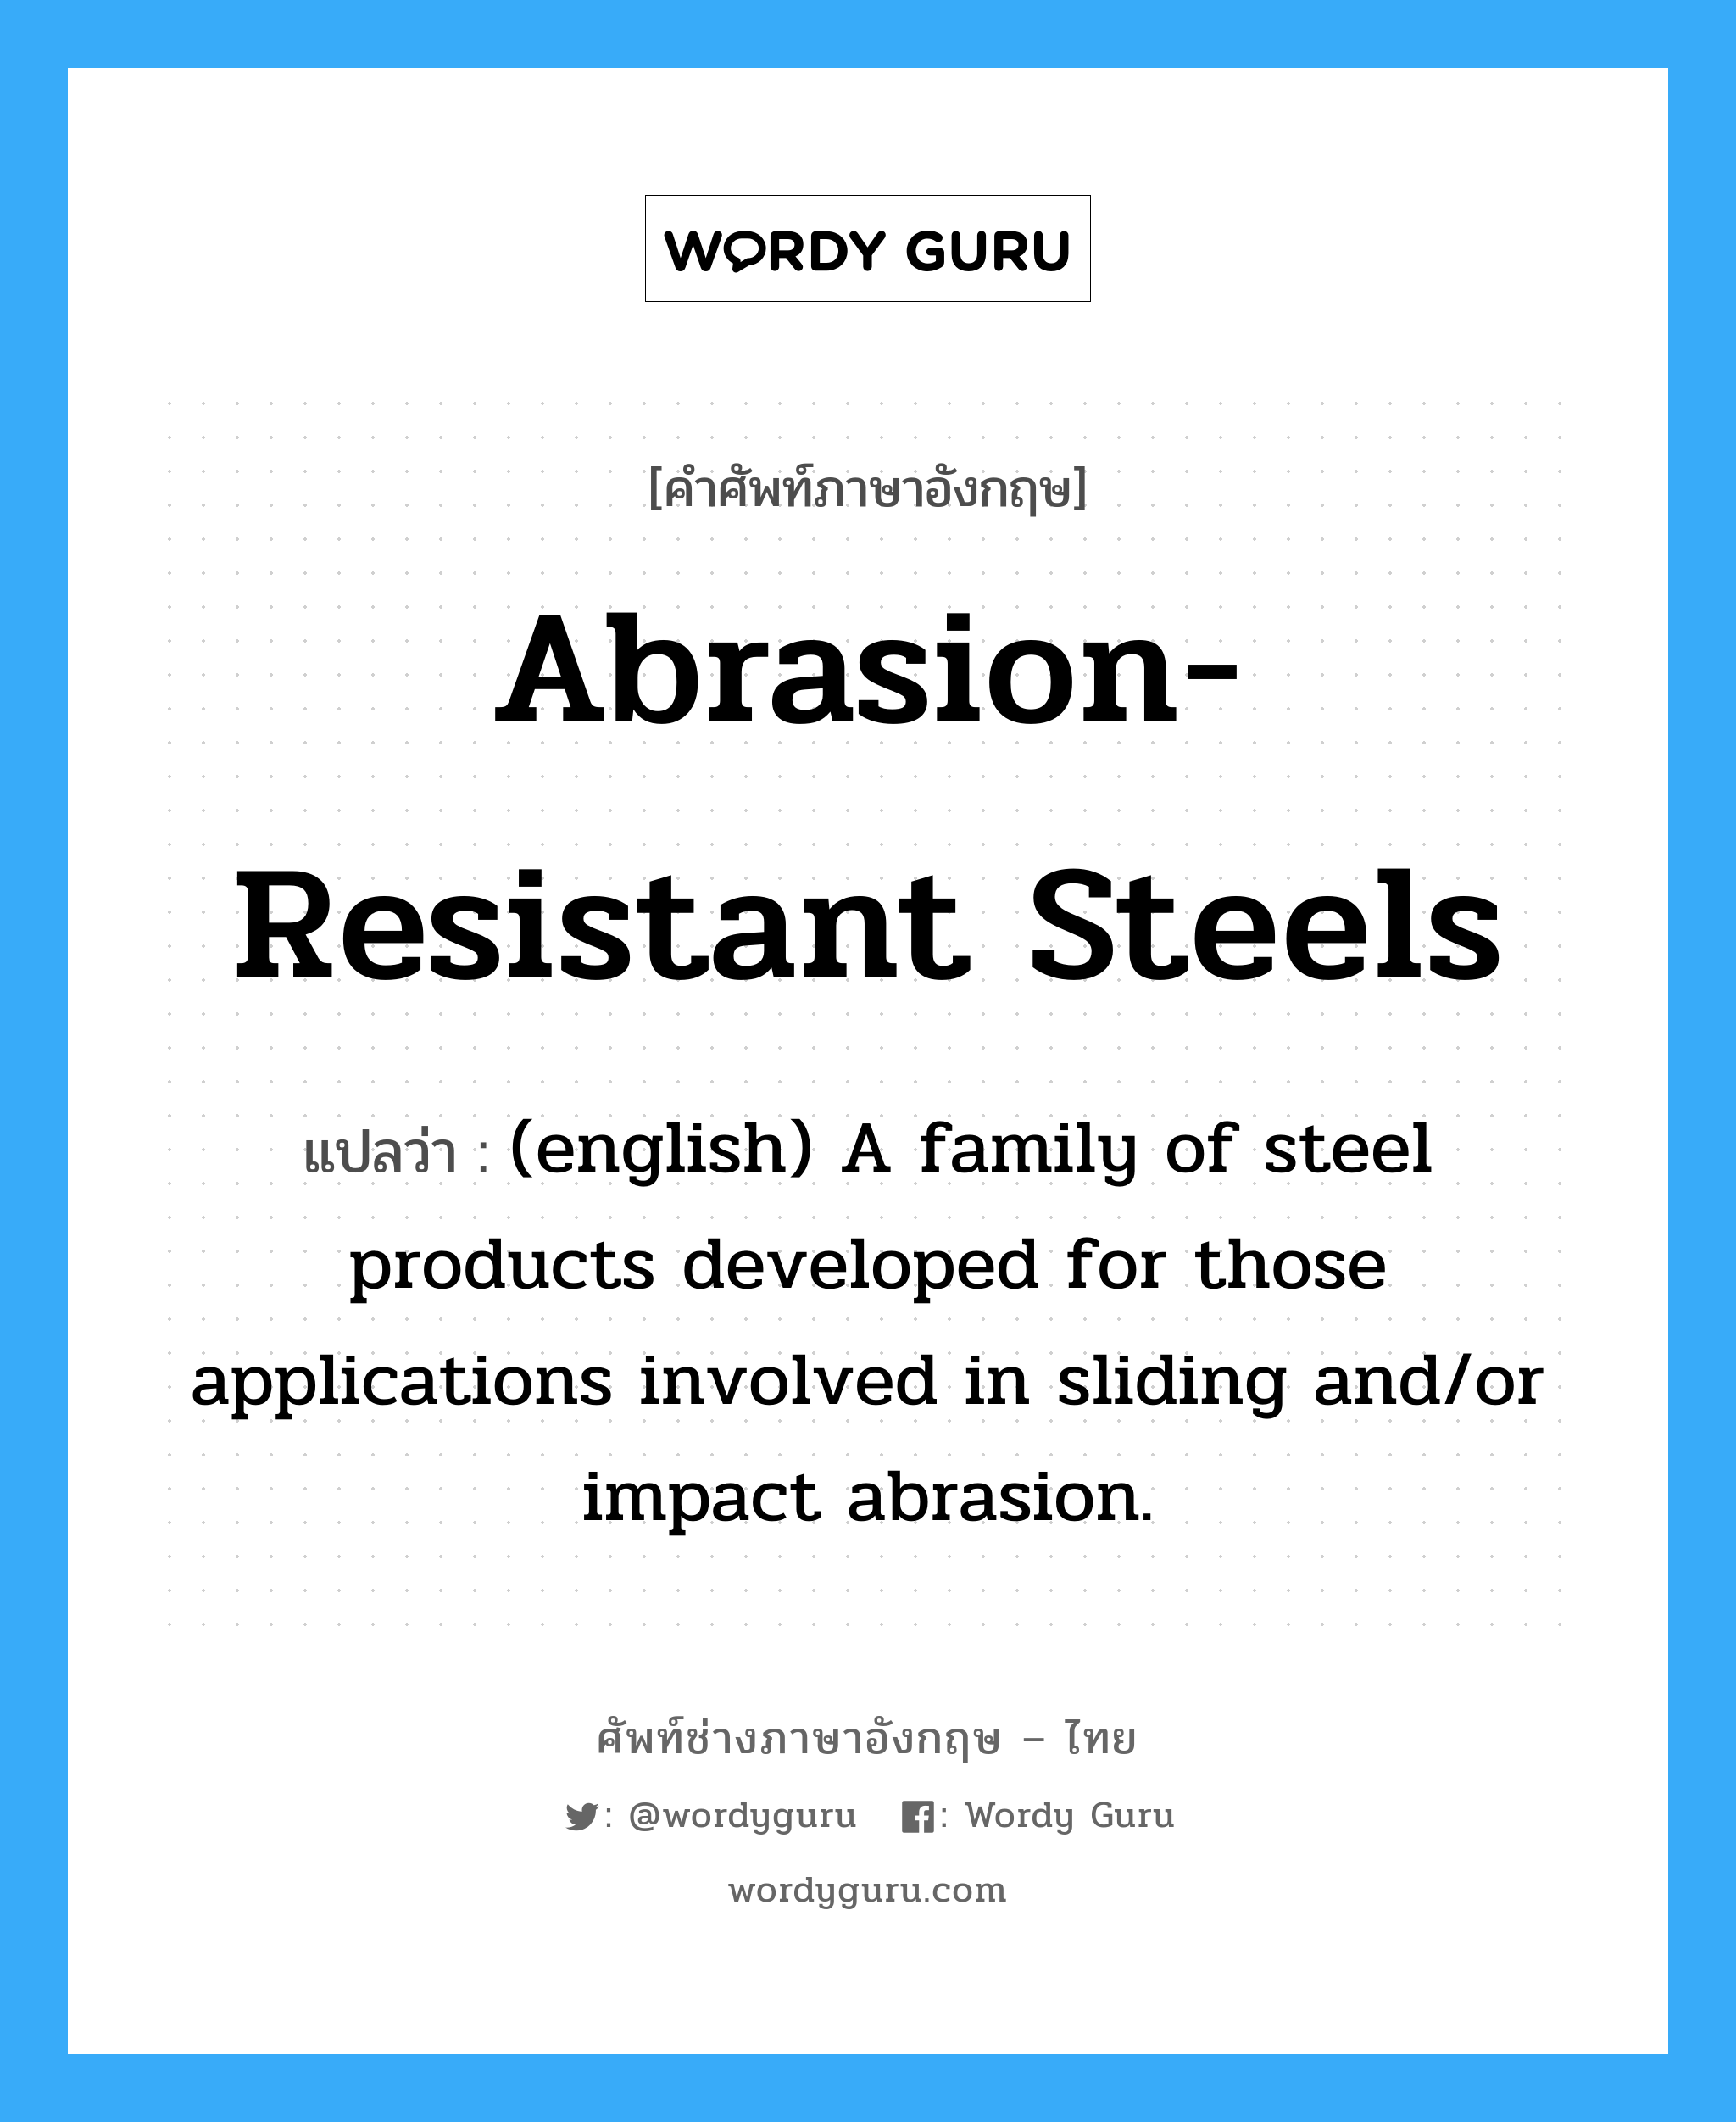 Abrasion-Resistant Steels แปลว่า?, คำศัพท์ช่างภาษาอังกฤษ - ไทย Abrasion-Resistant Steels คำศัพท์ภาษาอังกฤษ Abrasion-Resistant Steels แปลว่า (english) A family of steel products developed for those applications involved in sliding and/or impact abrasion.